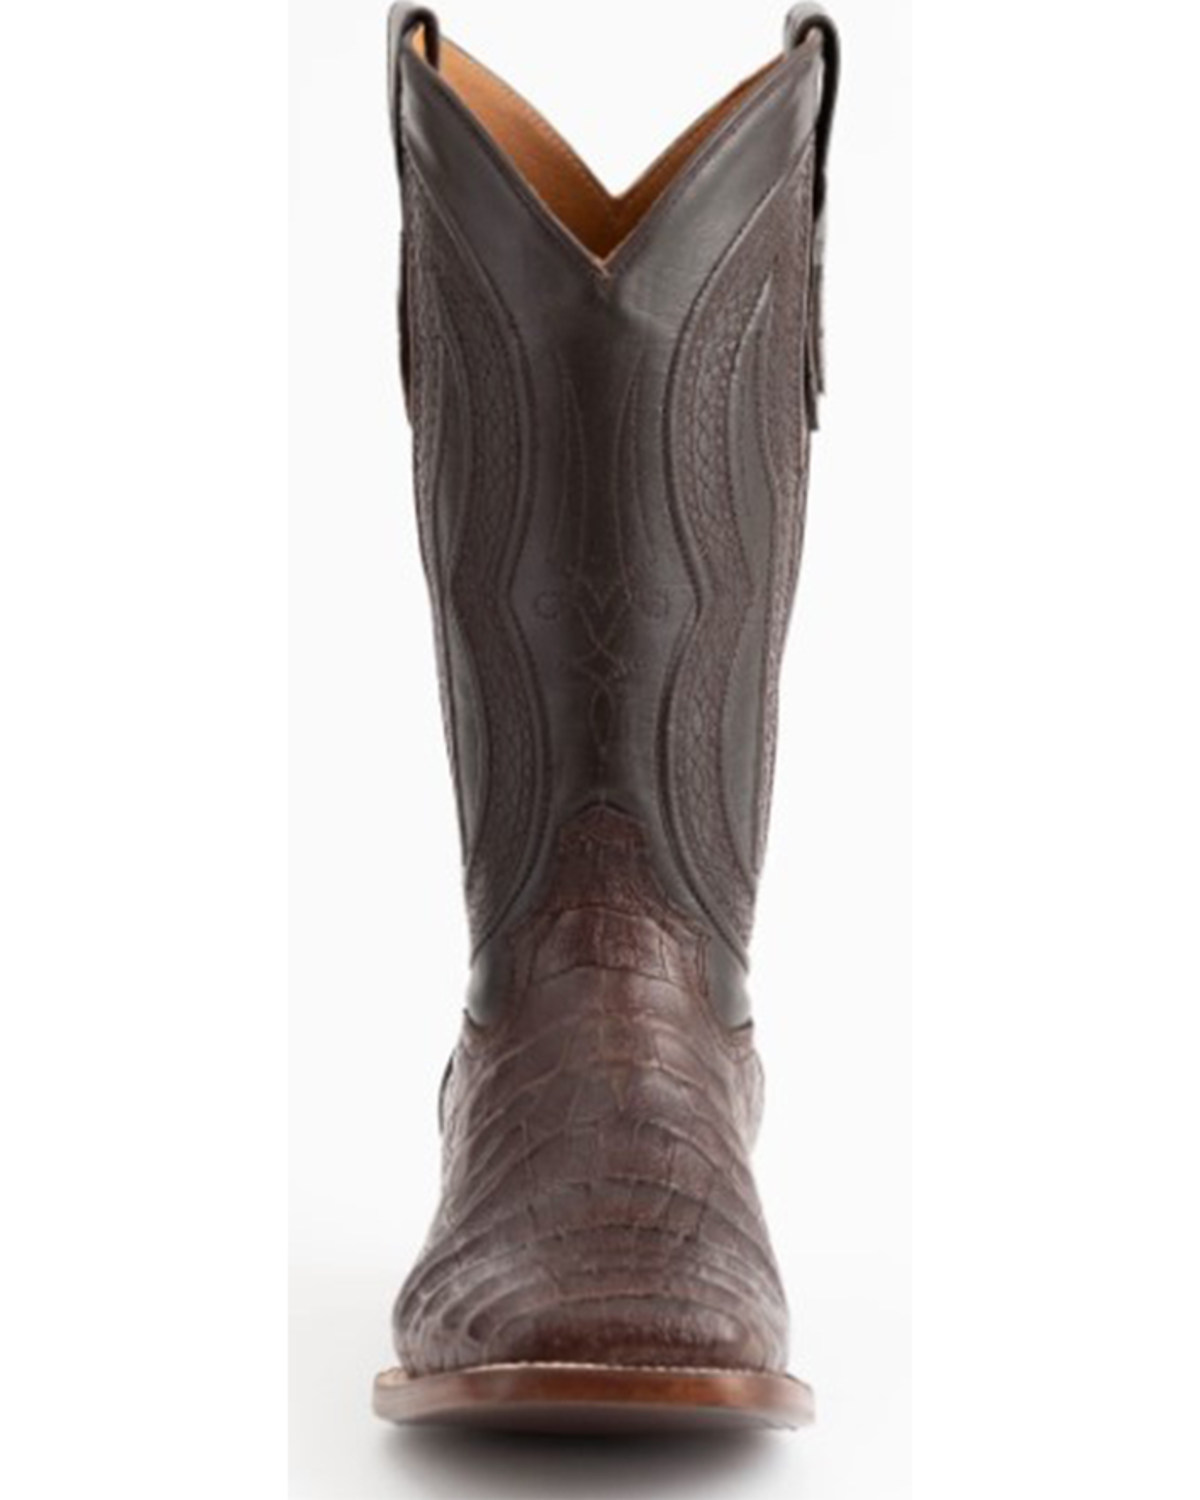 Ferrini  Mens Belly Caiman Chocolate Square Toe   Western Cowboy Boots   Mid Calf - image 4 of 7